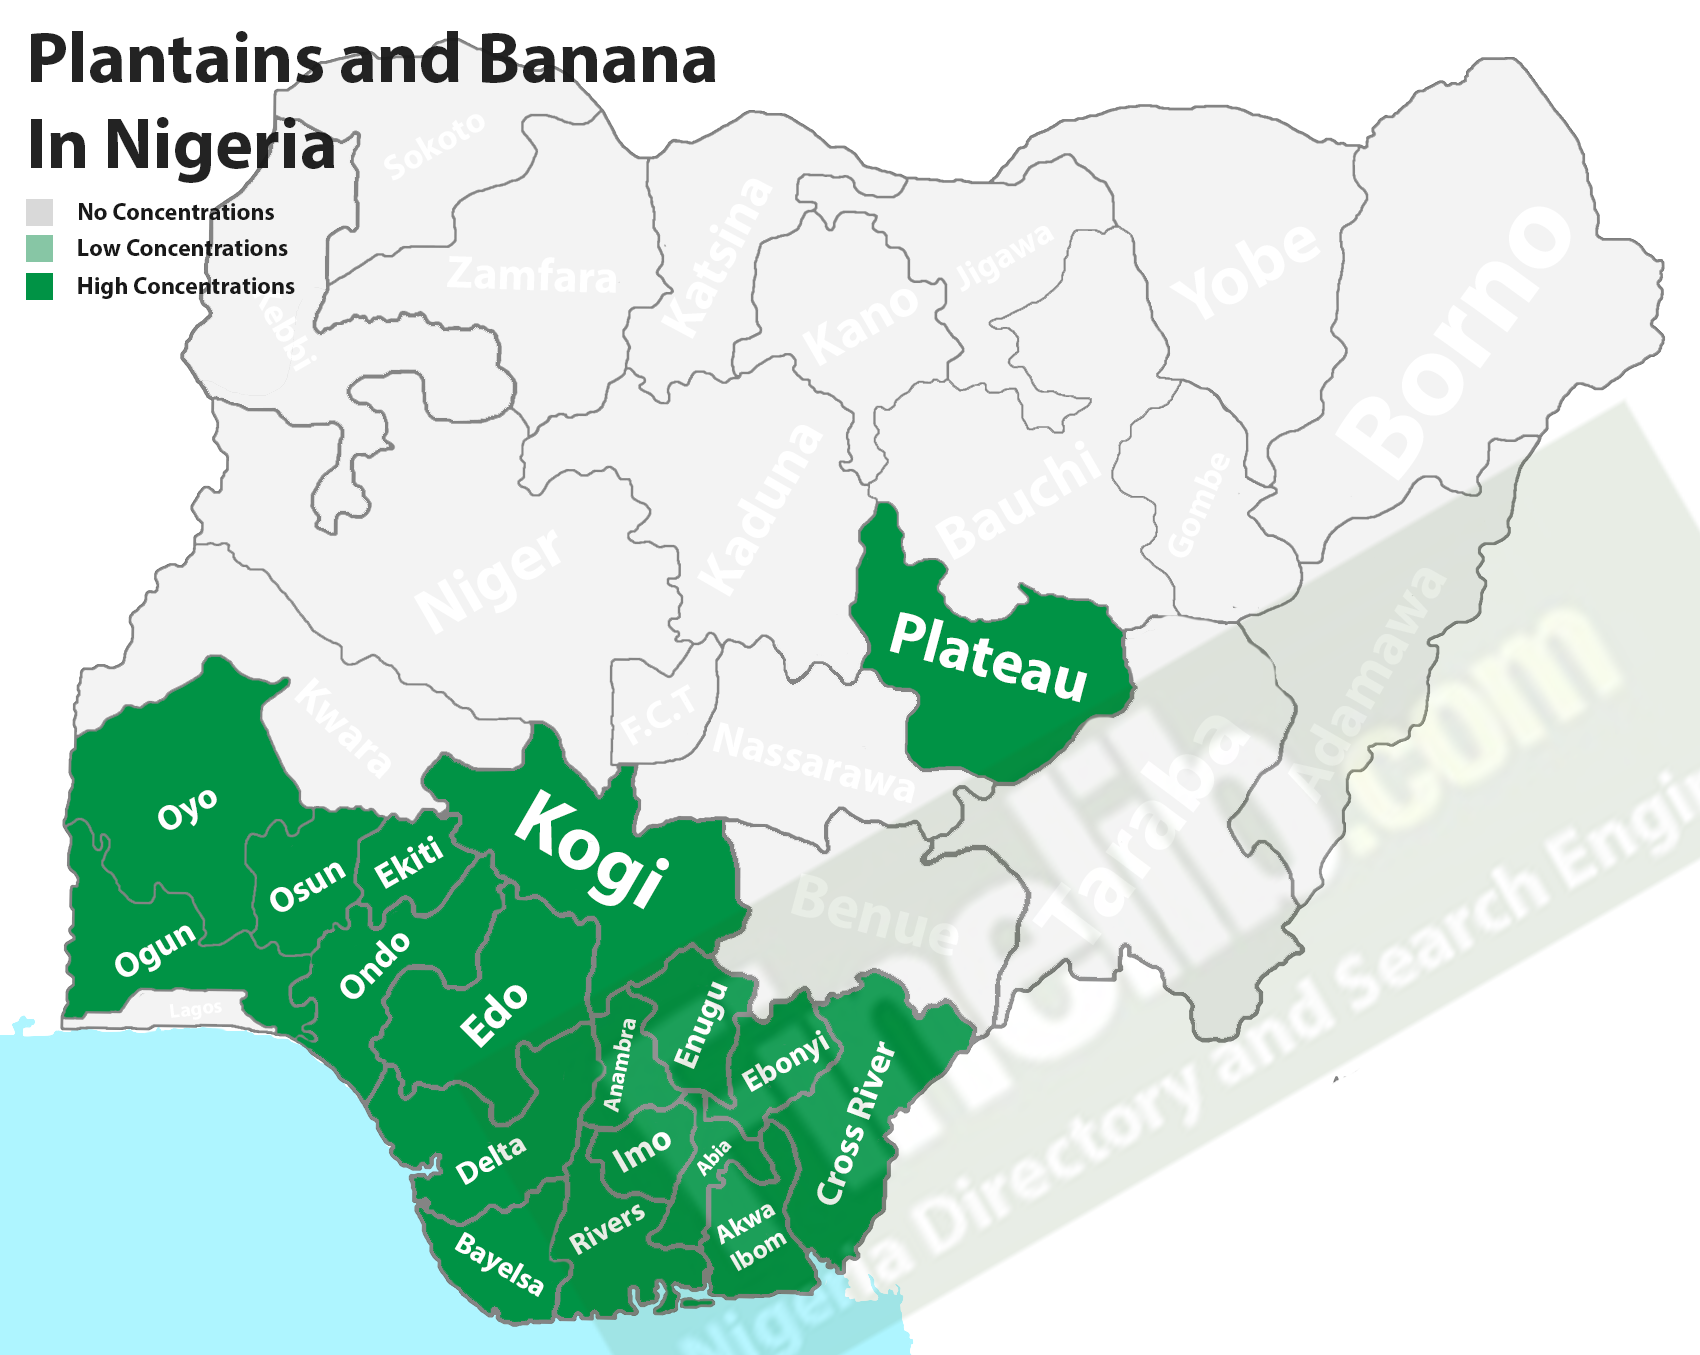 Plantain and banana cash crop producing states in Nigeria